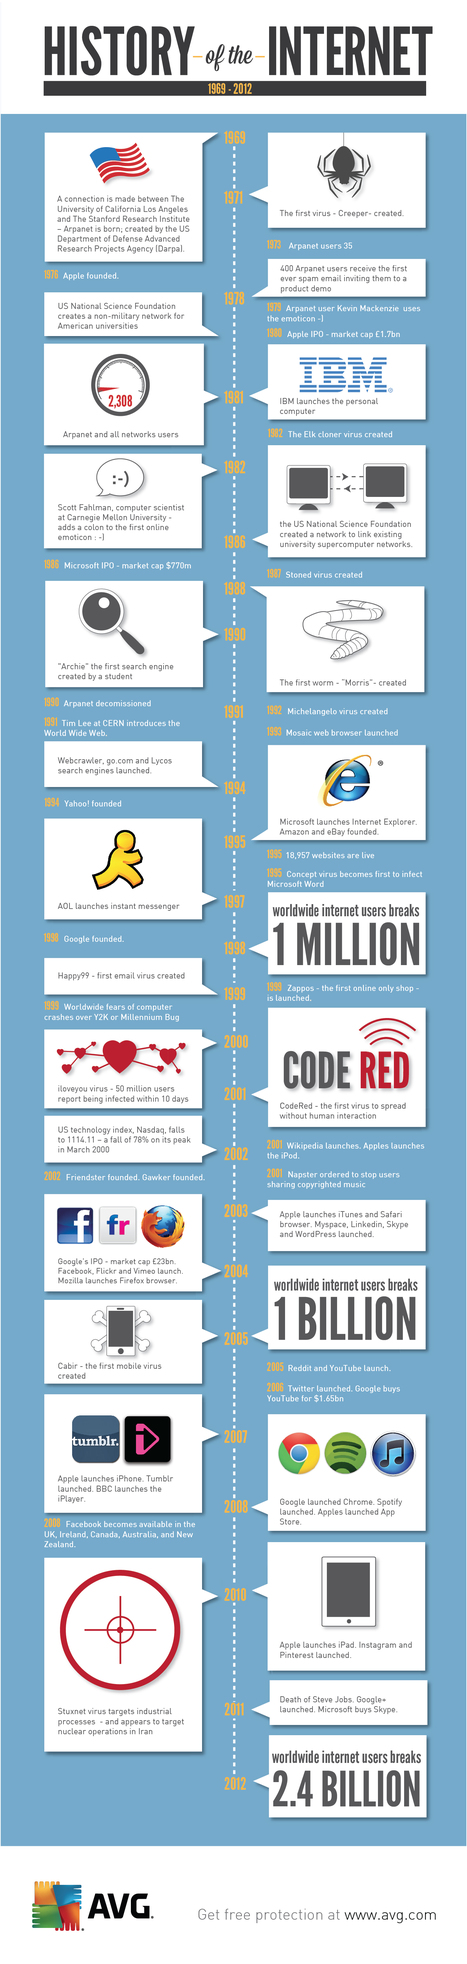 AVG Antivirus & Security Software - The History of the Internet [Infographic] | 21st Century Learning and Teaching | Scoop.it